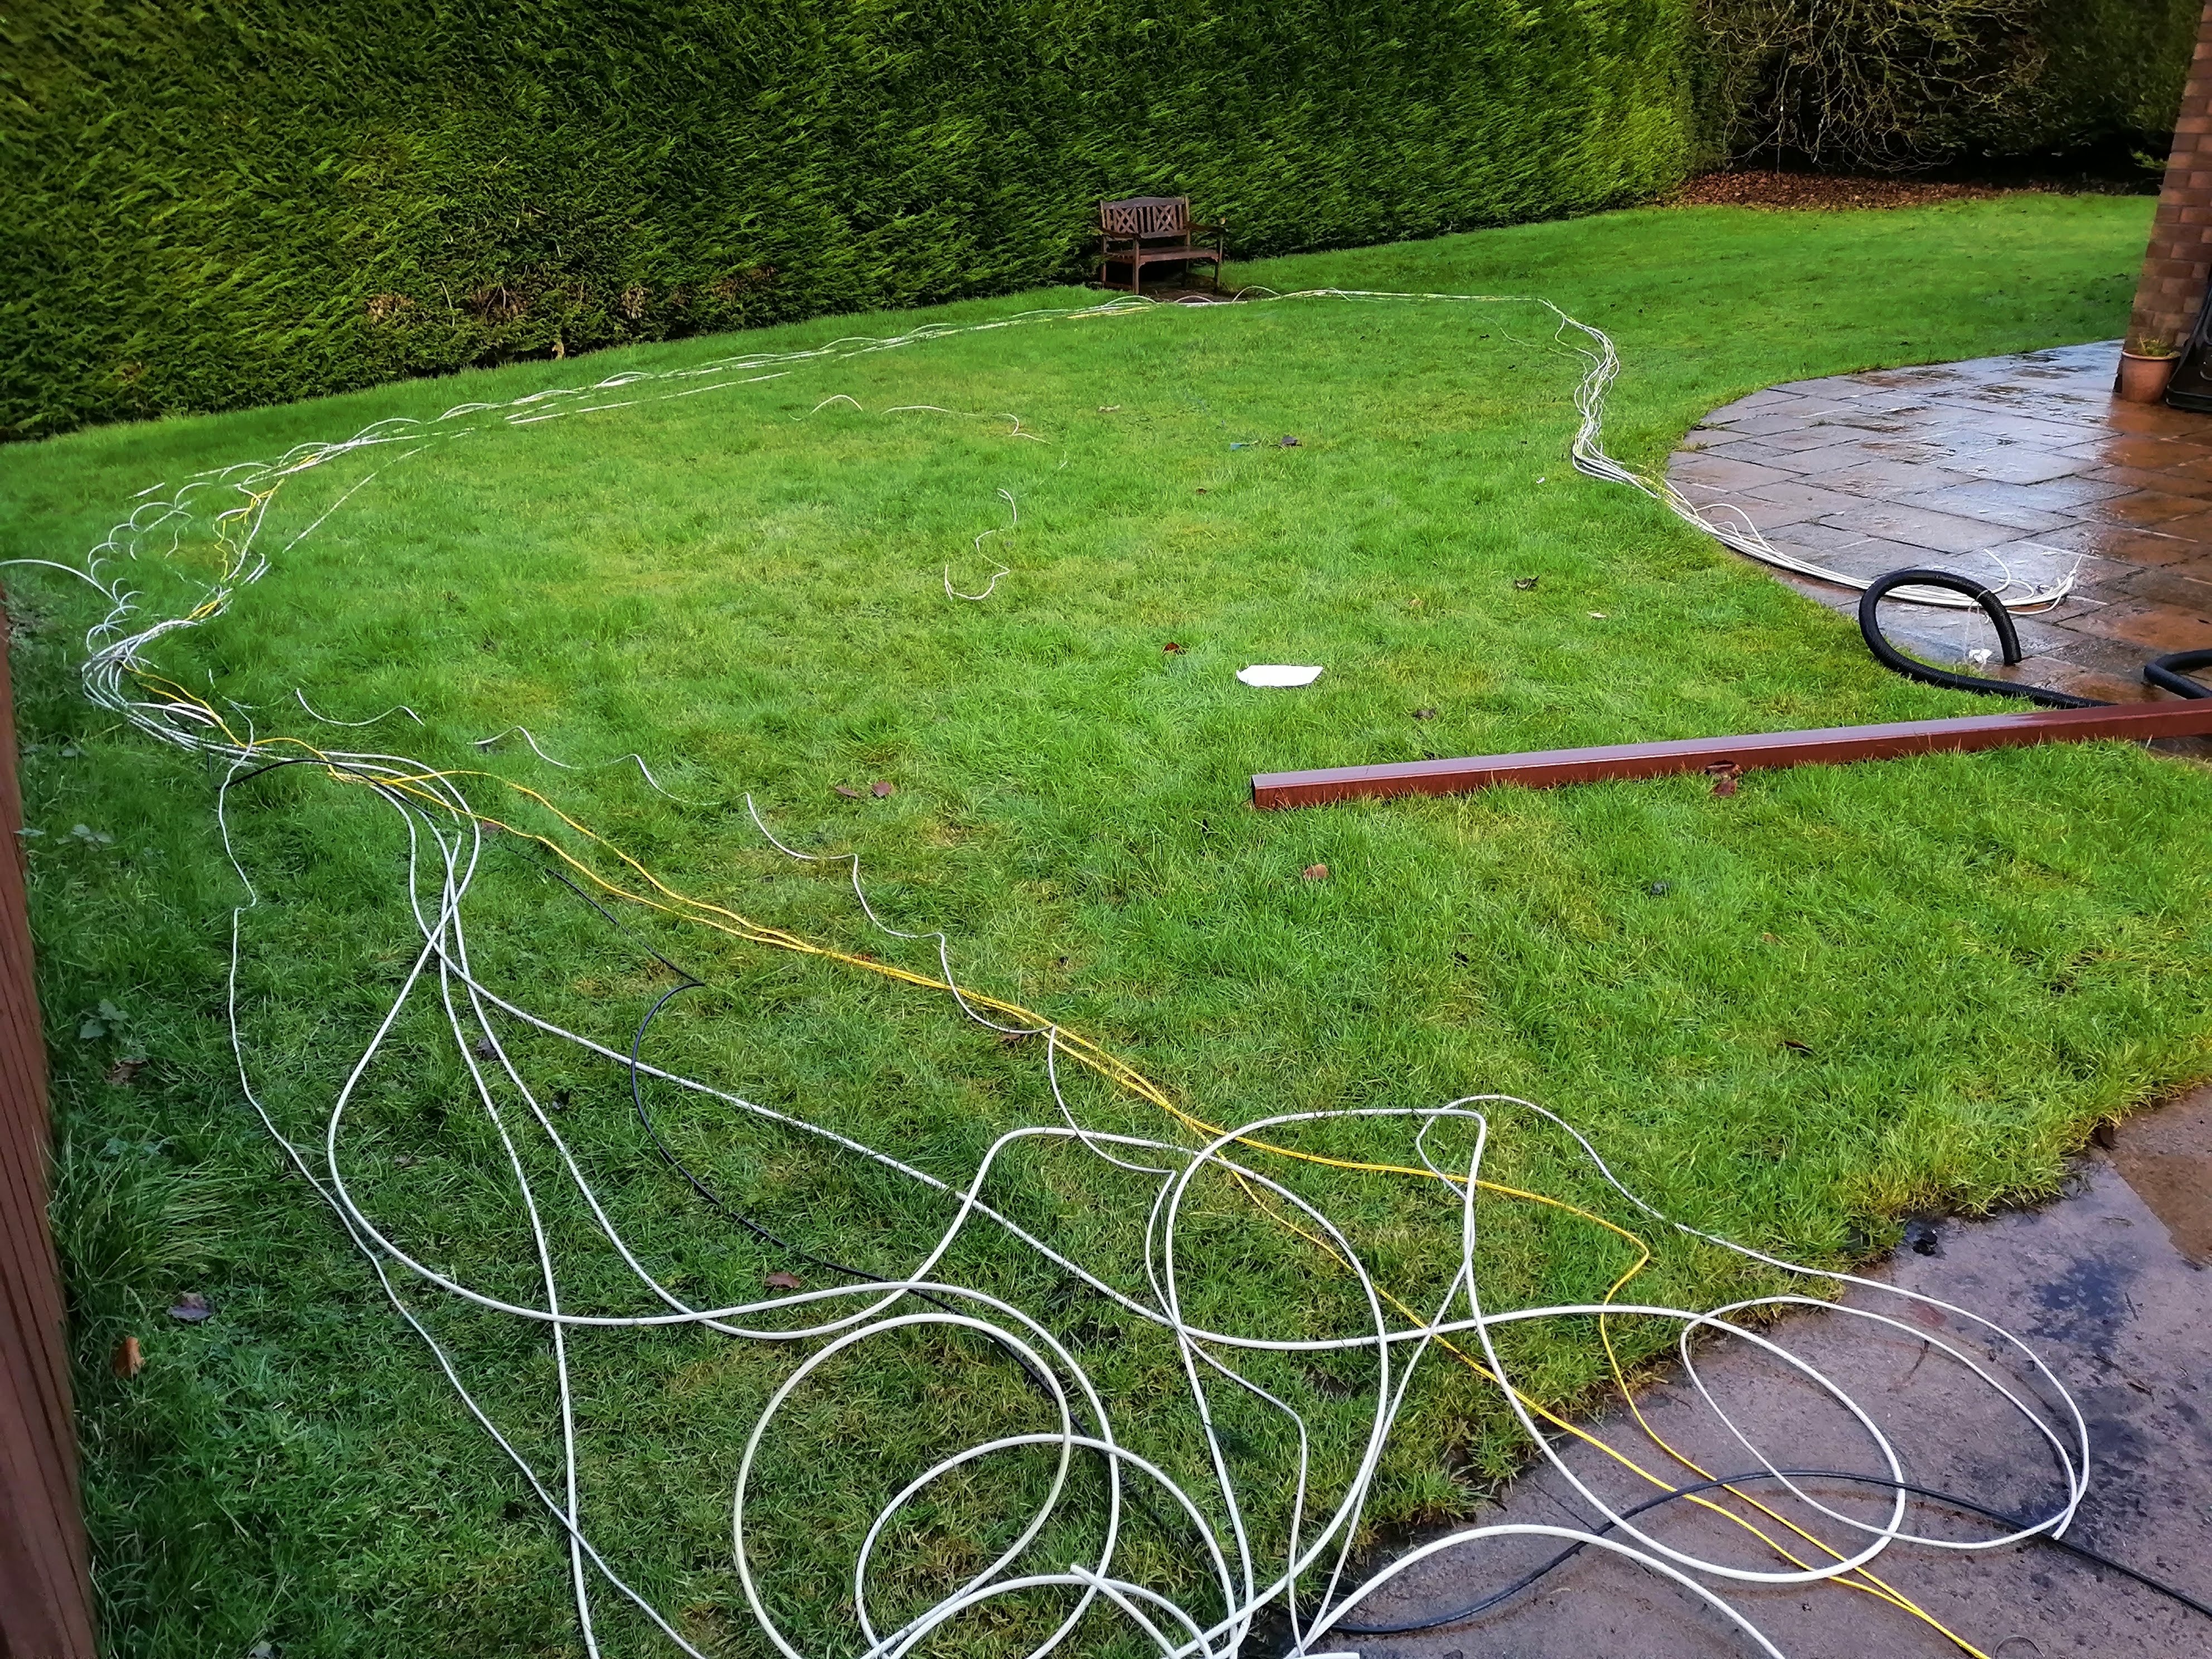 cables layed out across the garden, with the flexible conduit sticking out of the ground